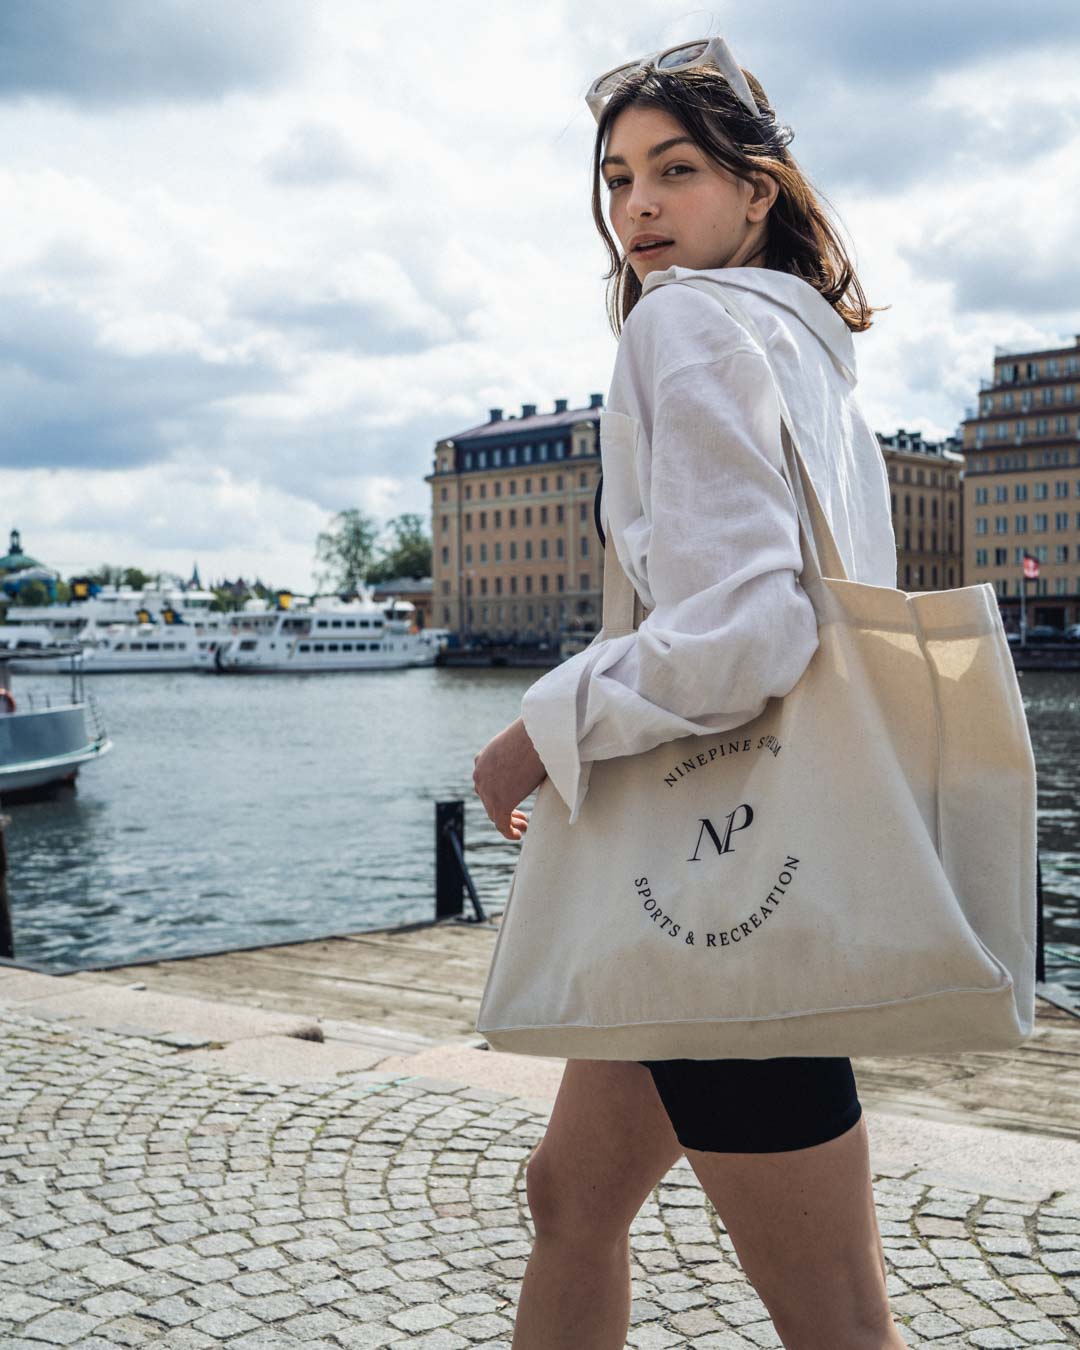 Woman walking by the water in biker shorts and a ninepine canvas tote bag